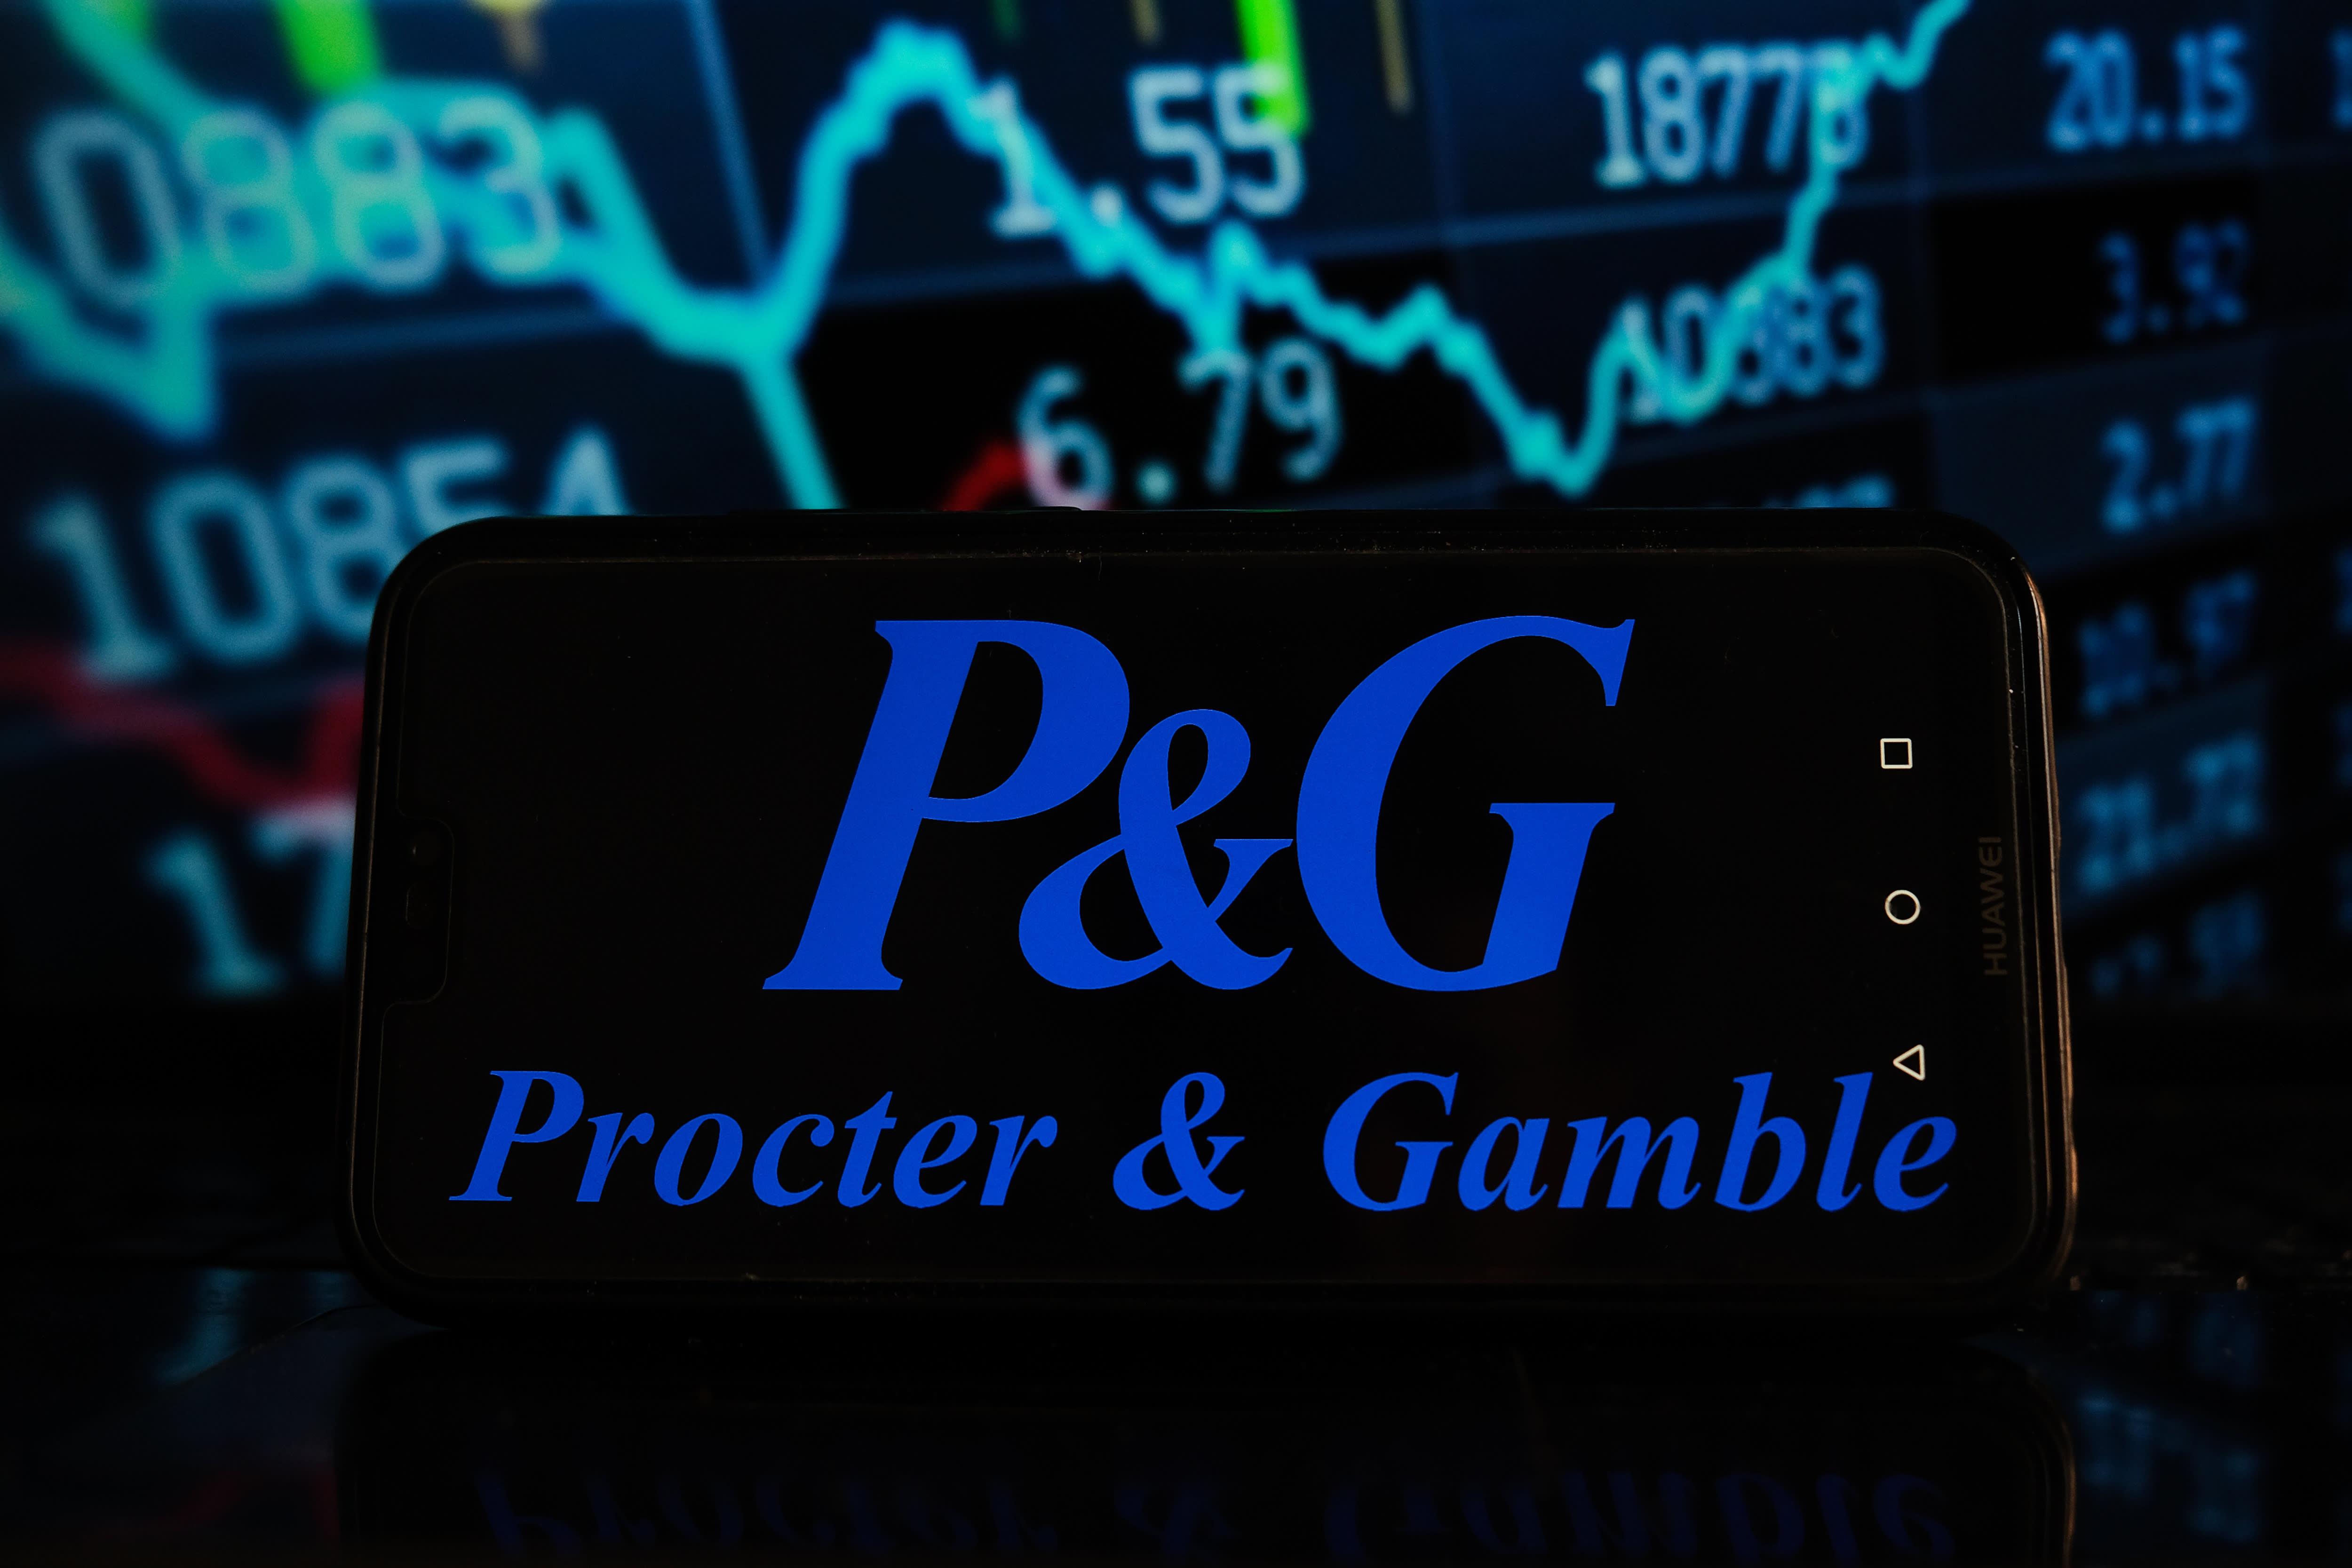 Procter & Gamble, CSX, and PPG